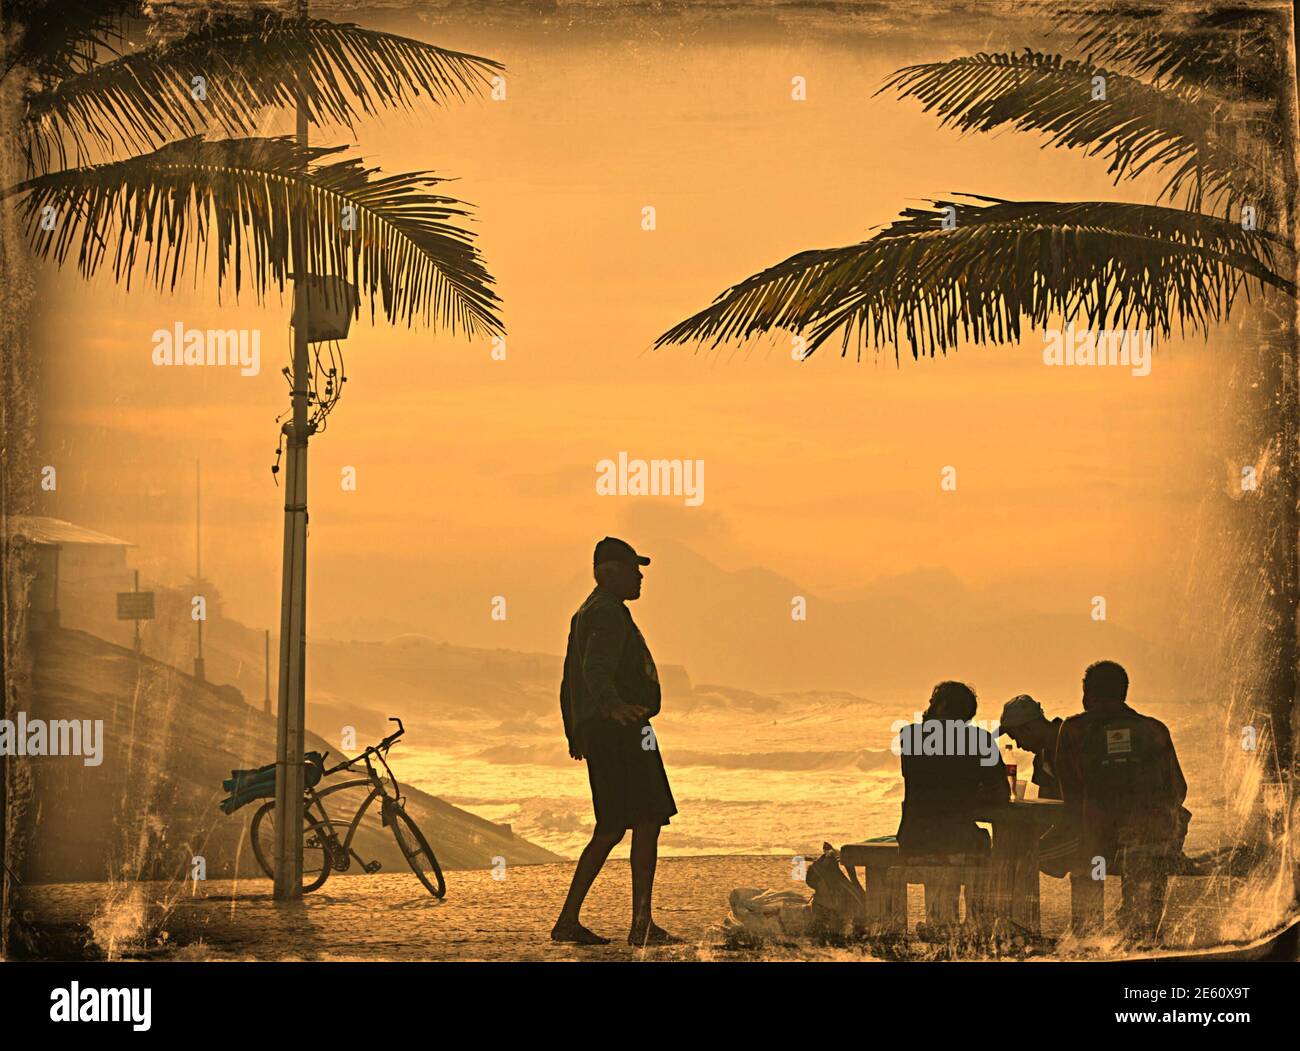 Sunset seascape with local people and palm trees silhouettes on the shoreline of Ipanema Beach in Rio de Janeiro Brazil. Stock Photo